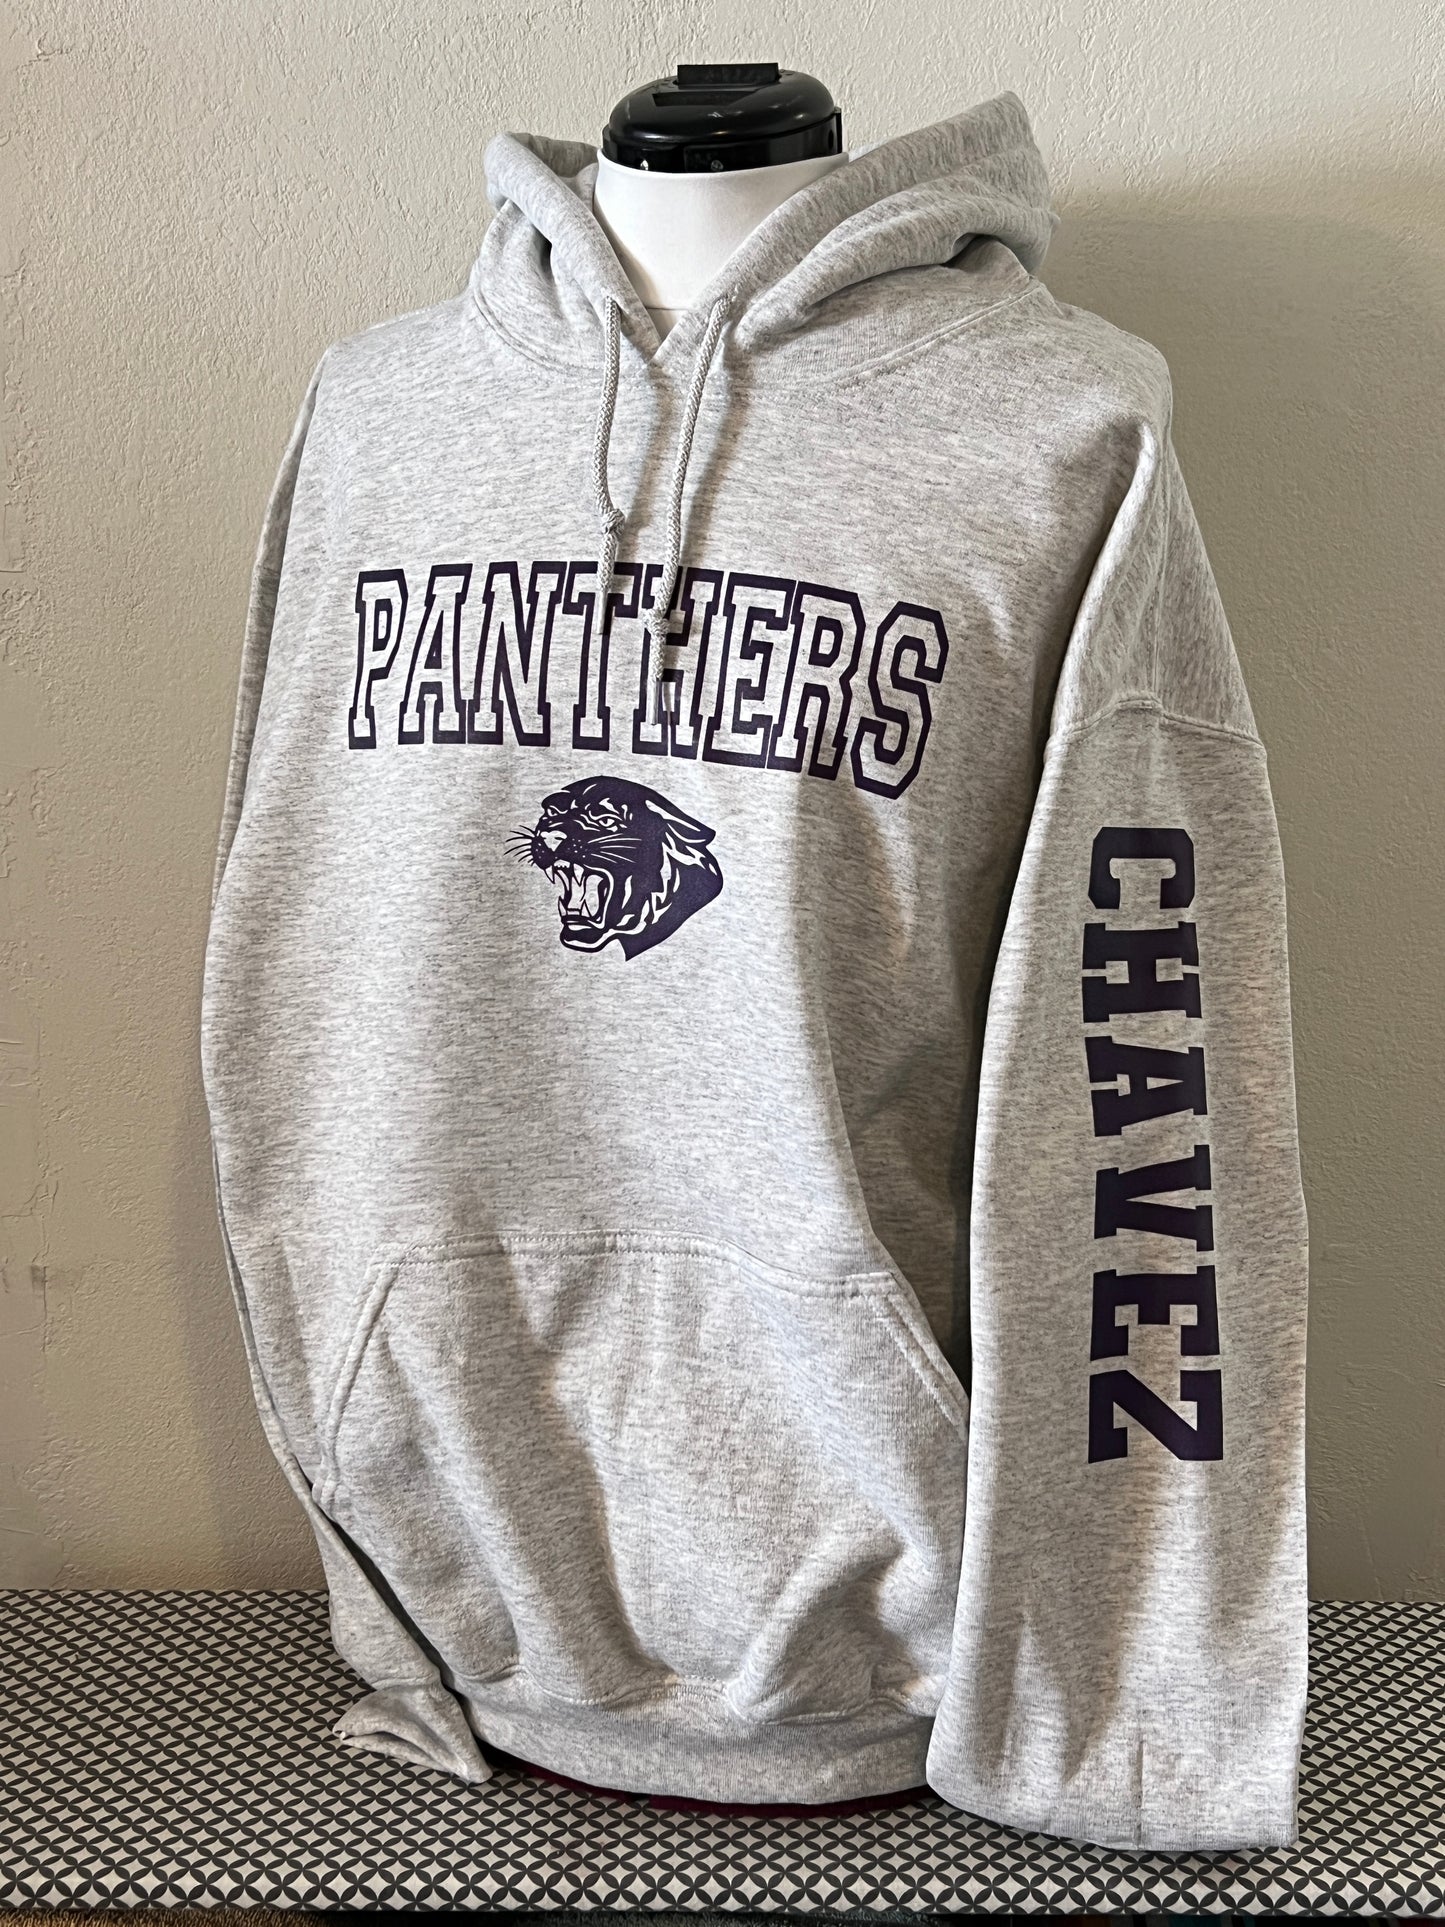 Lake County Panther Top